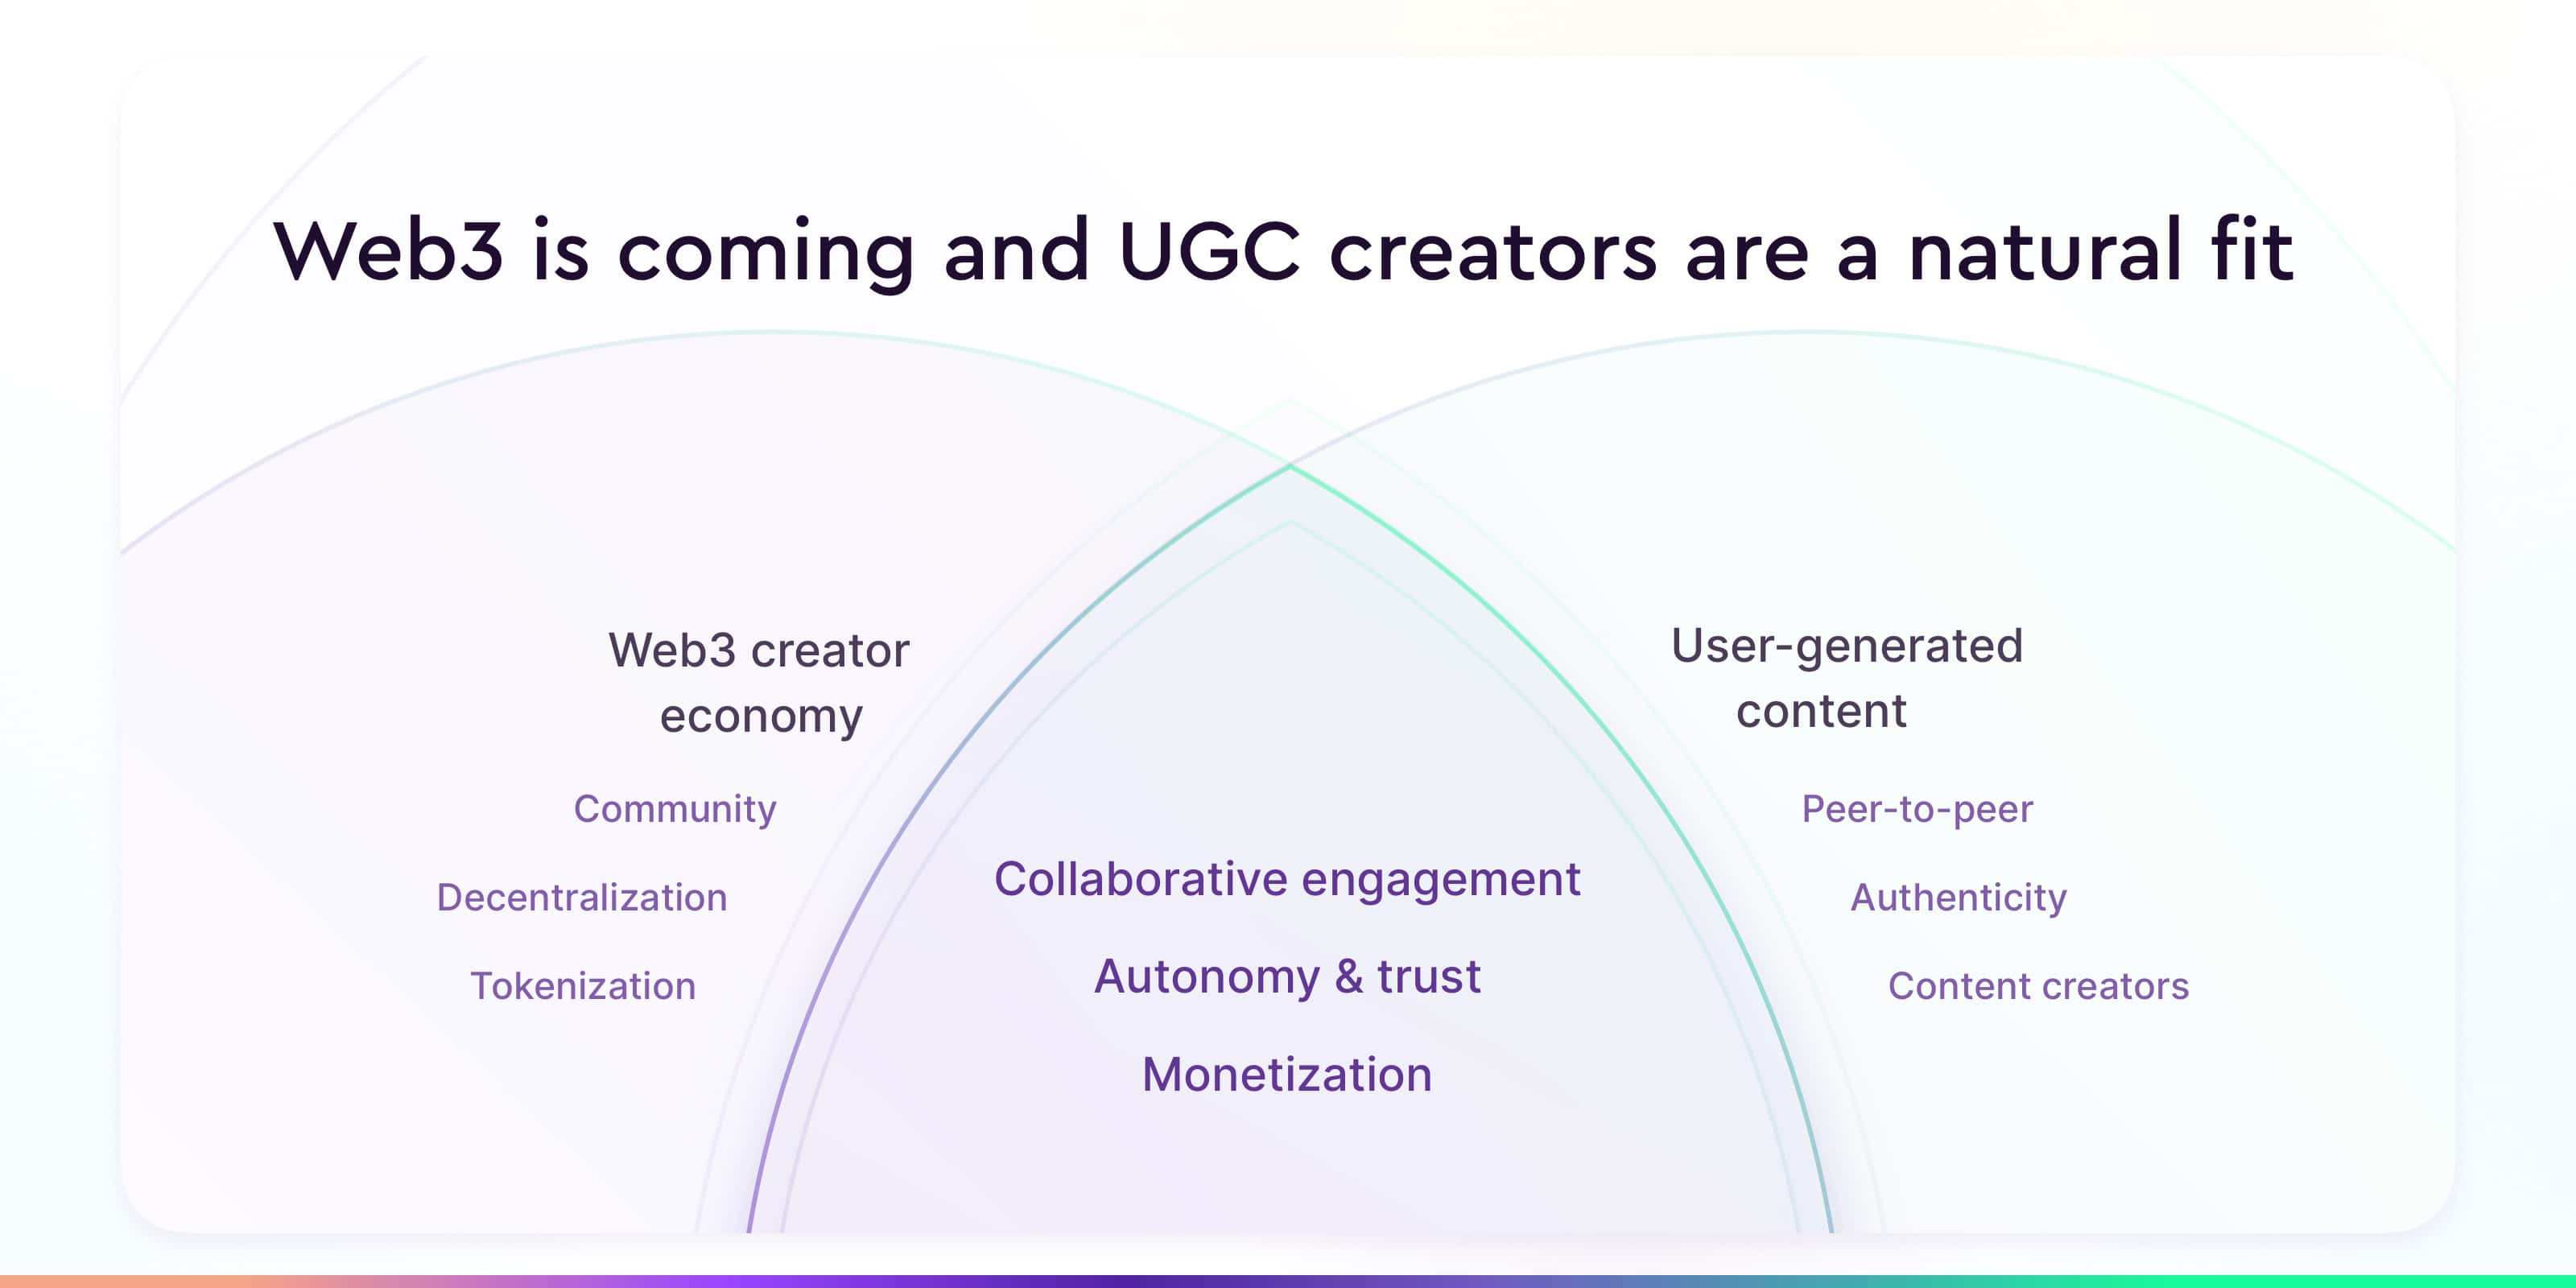 Web3 and UGC creators are a natural fit